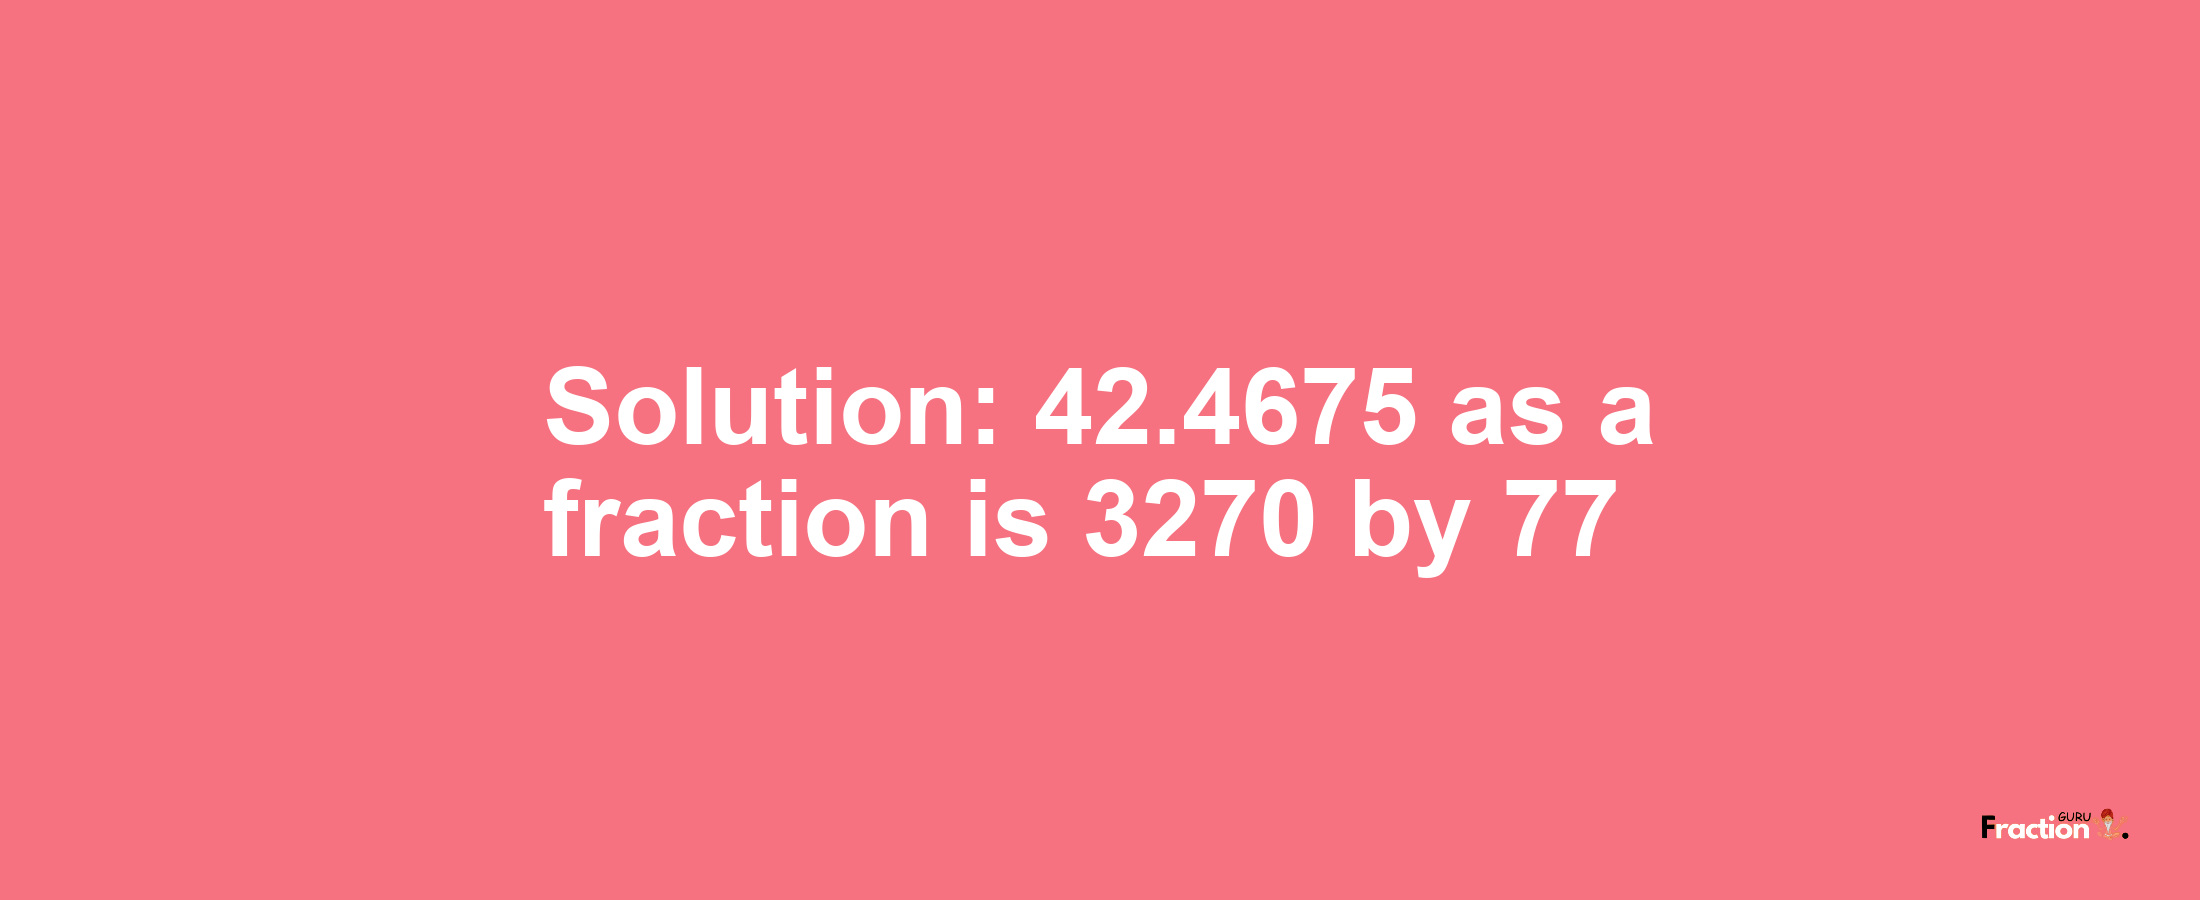 Solution:42.4675 as a fraction is 3270/77